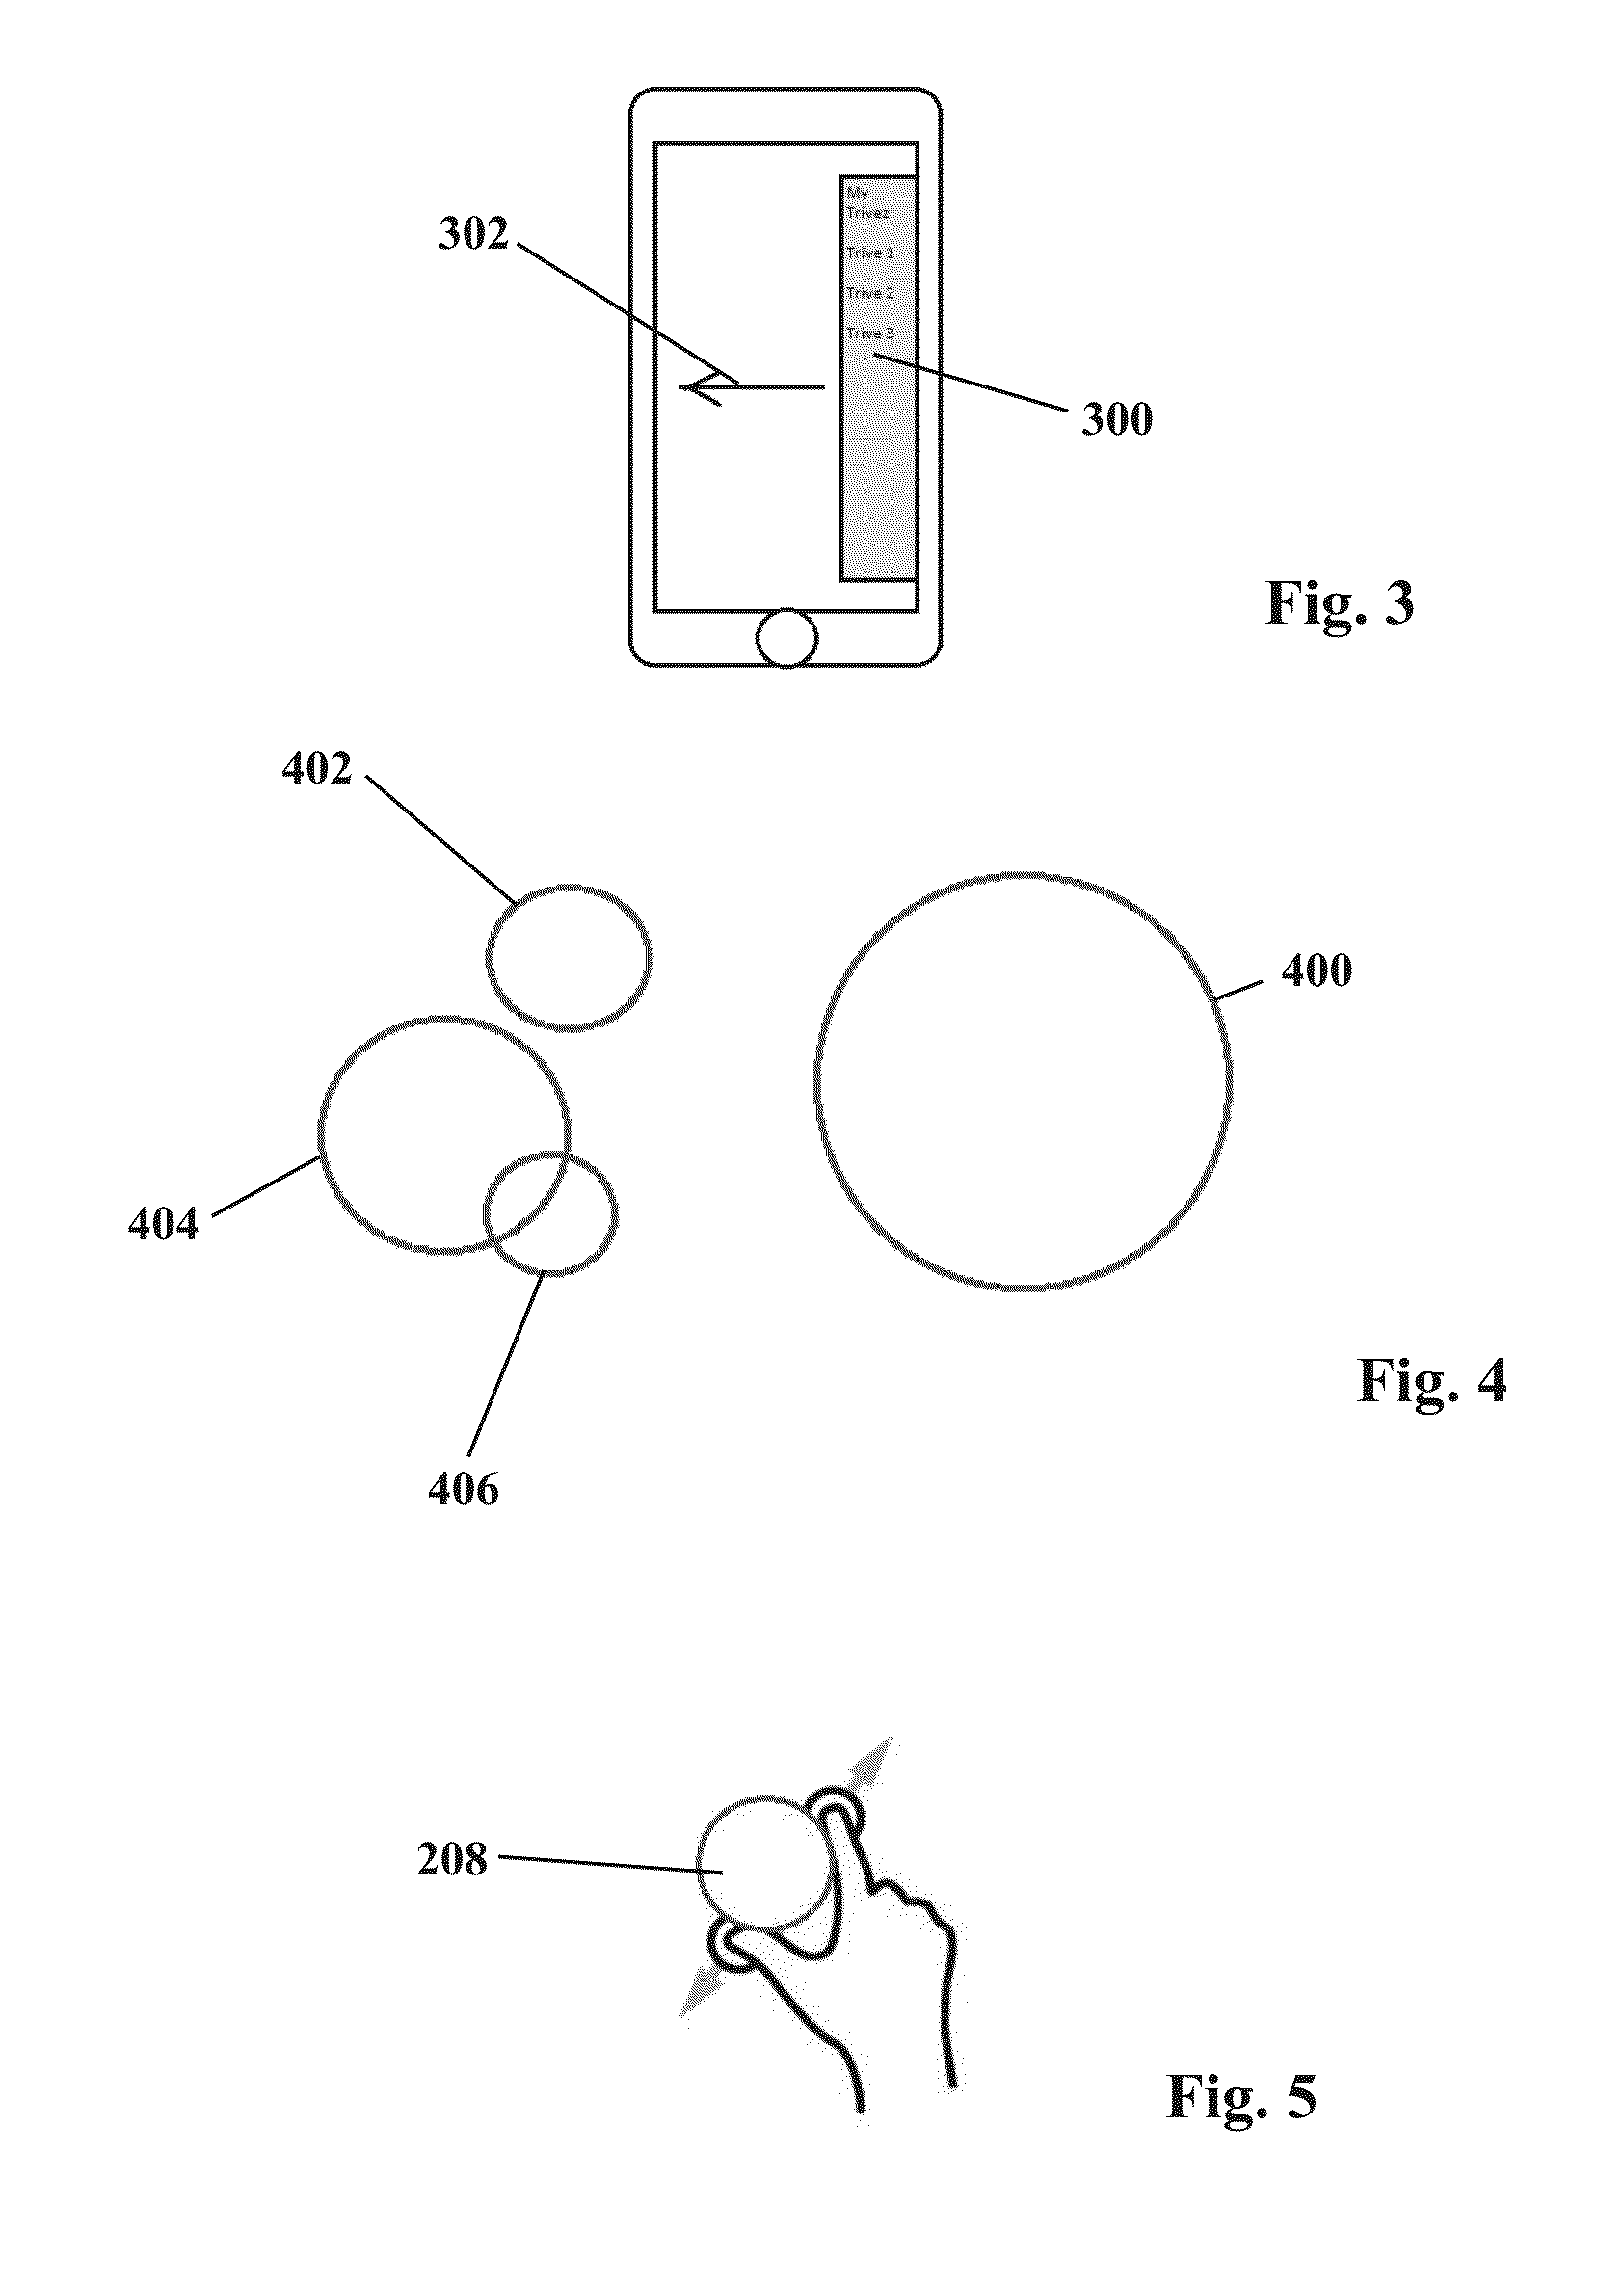 Method of Accessing Information and Related Networks